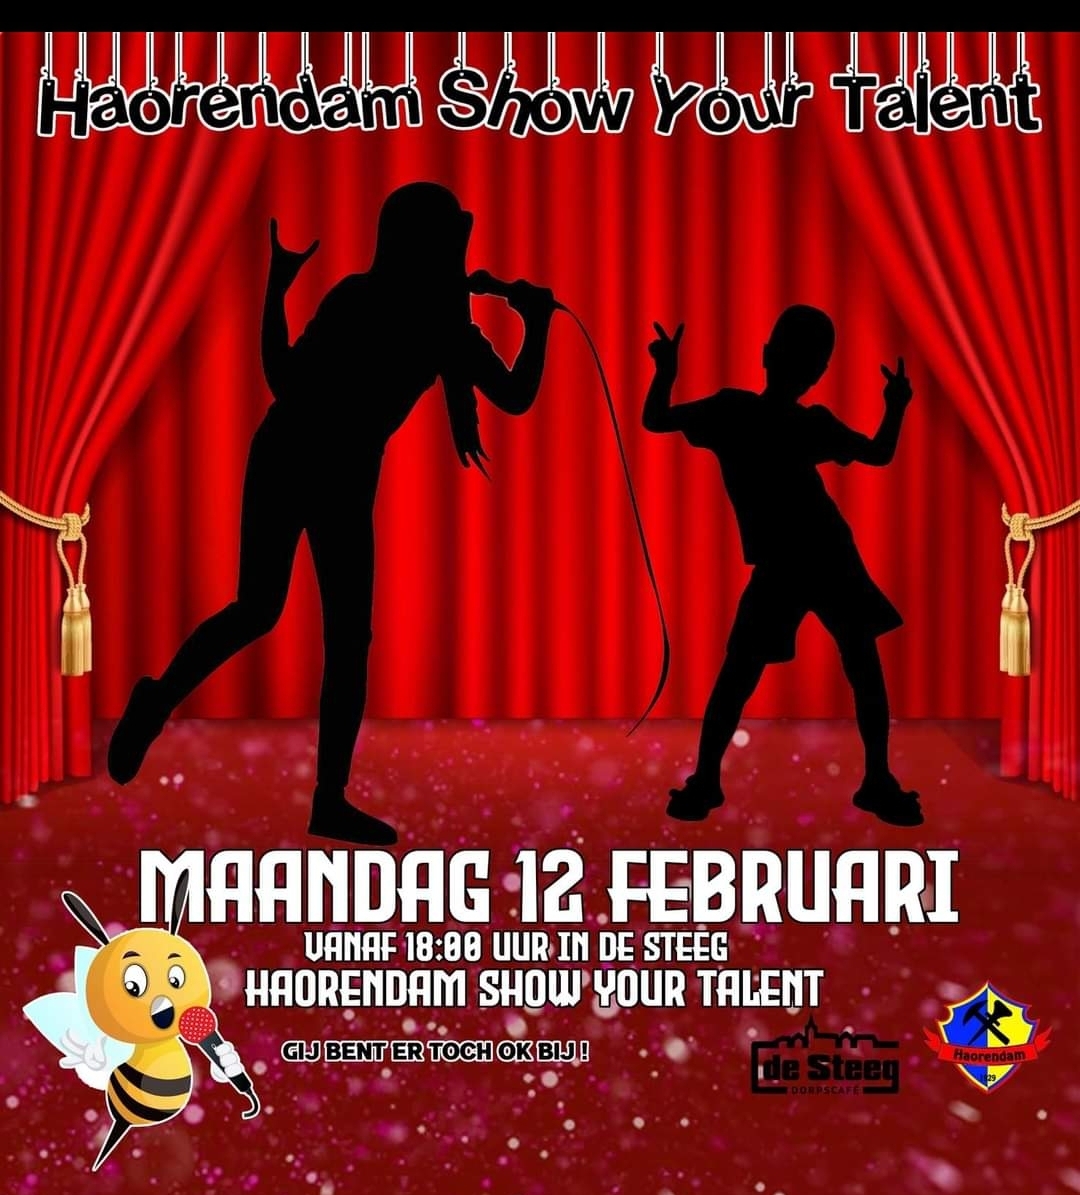 Show your Talent